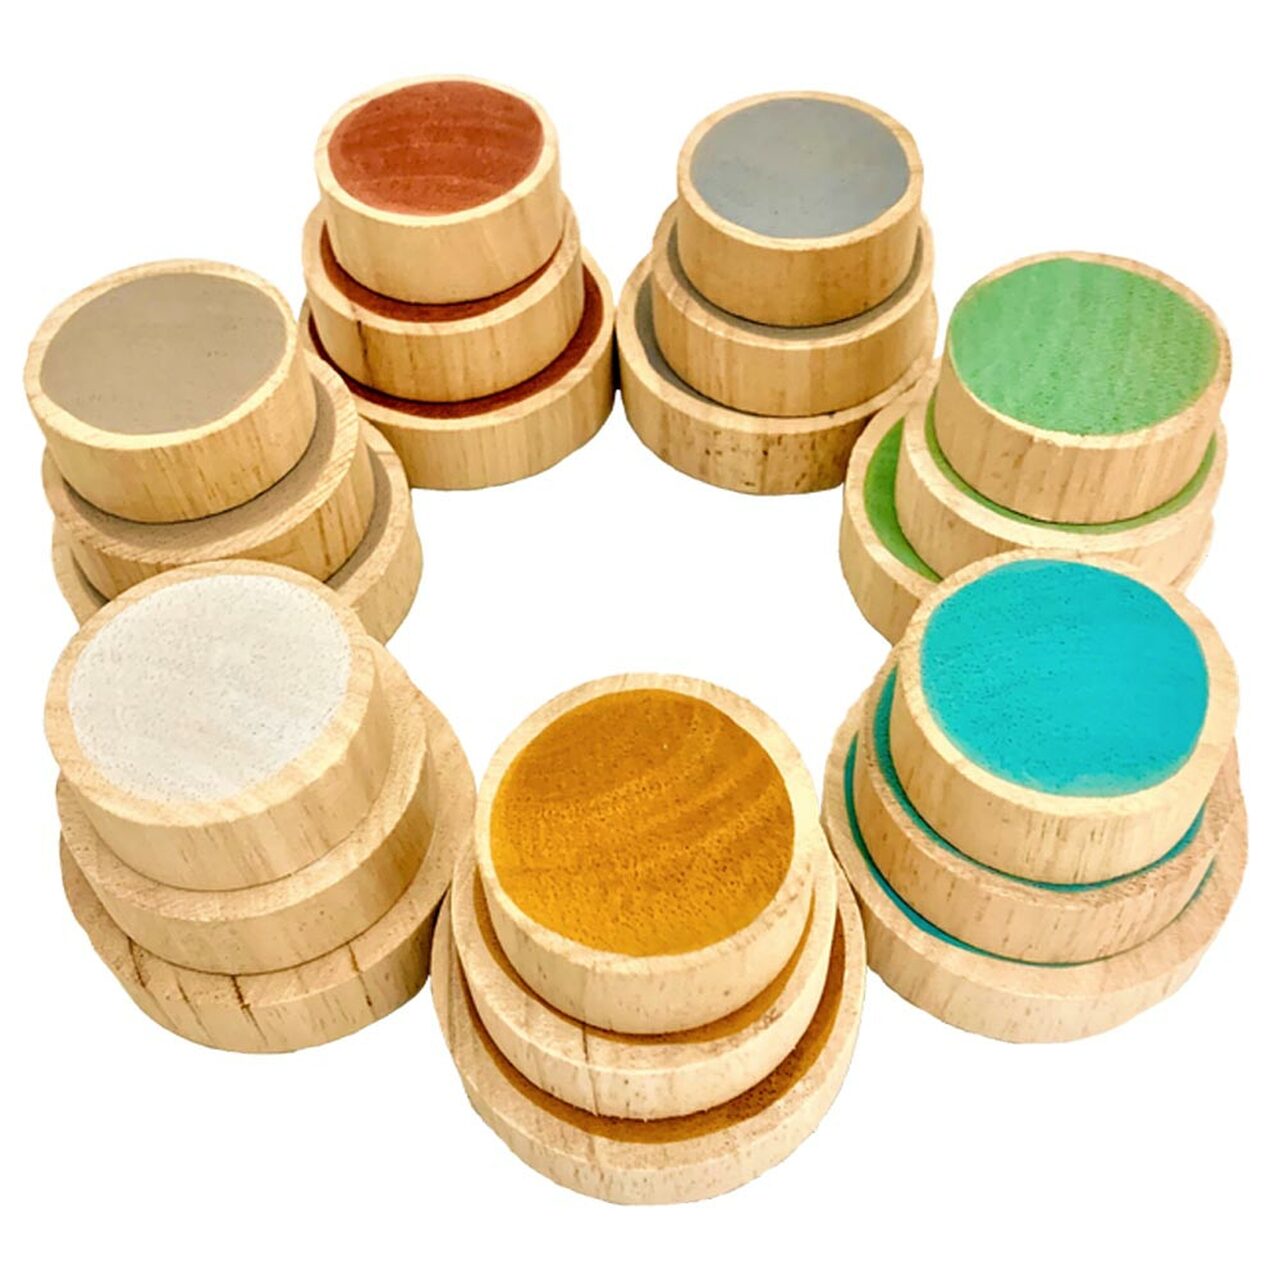 PAPOOSE Earth Coins Wooden - Set of 21